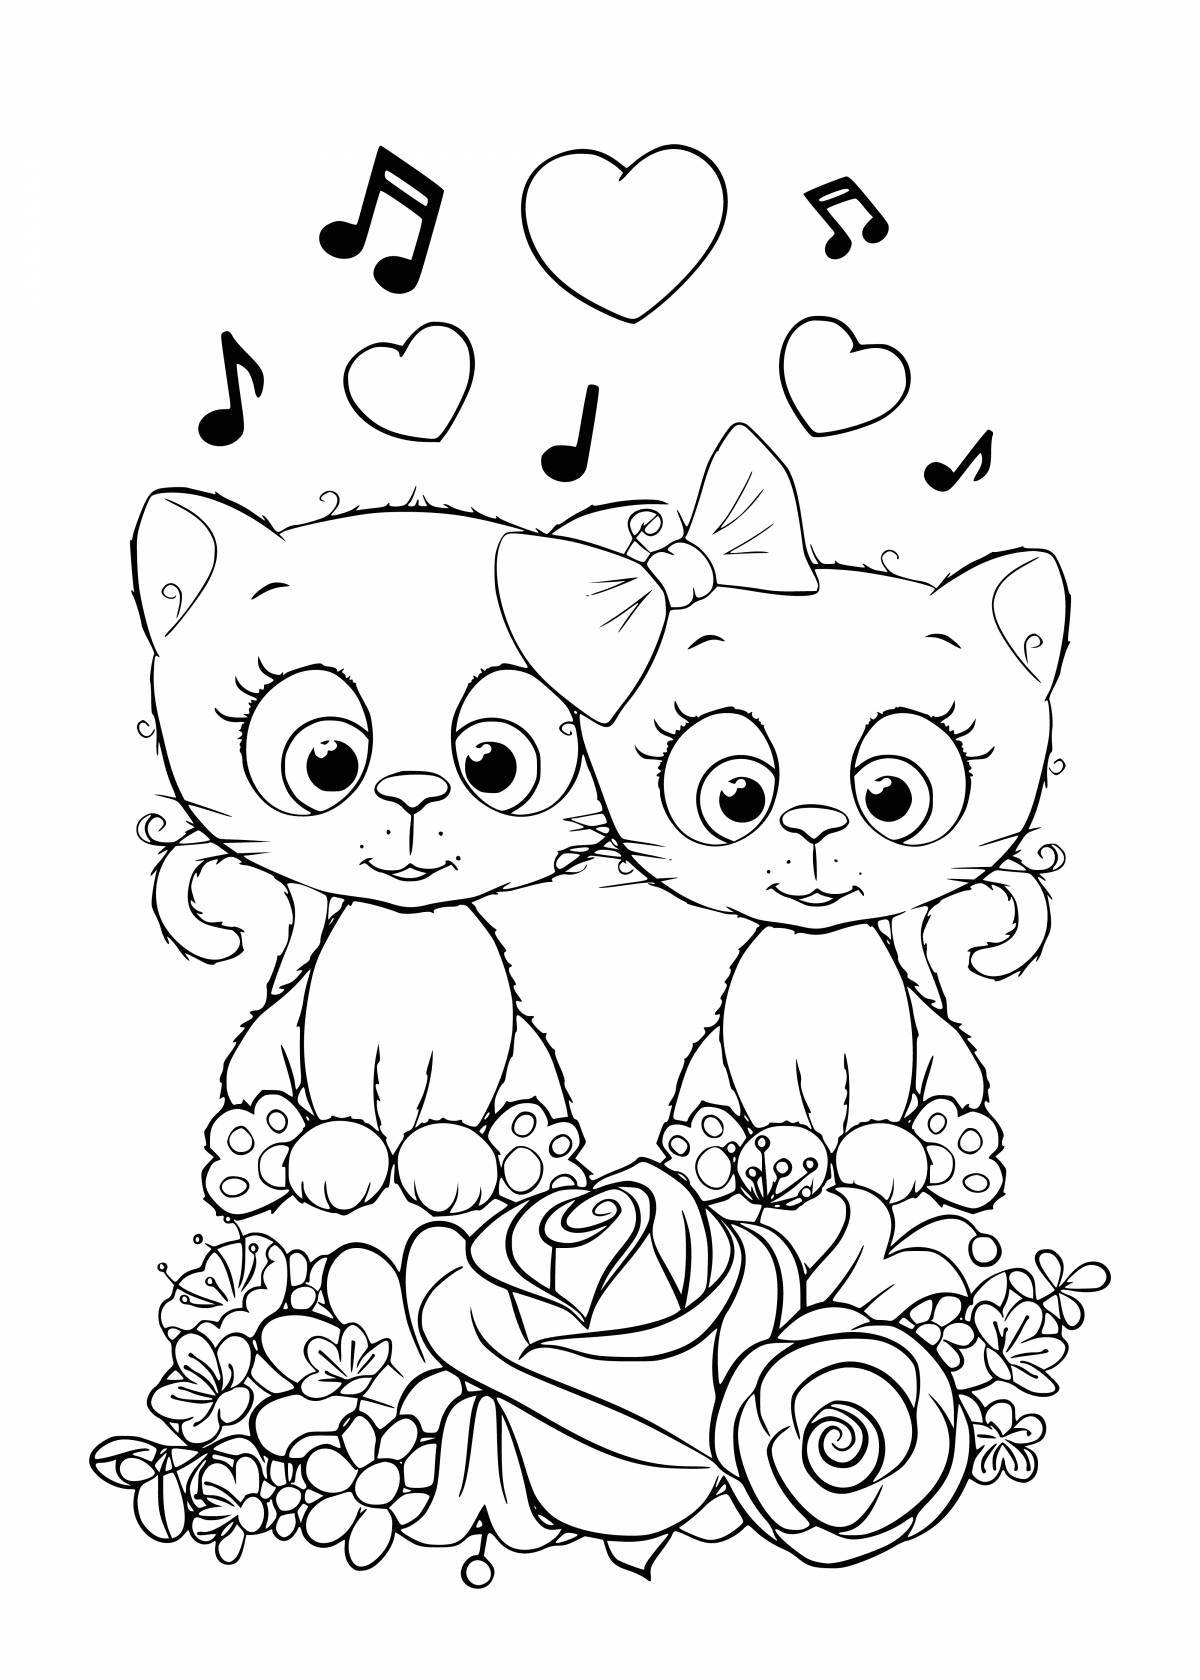 Sweet kitty girls coloring book